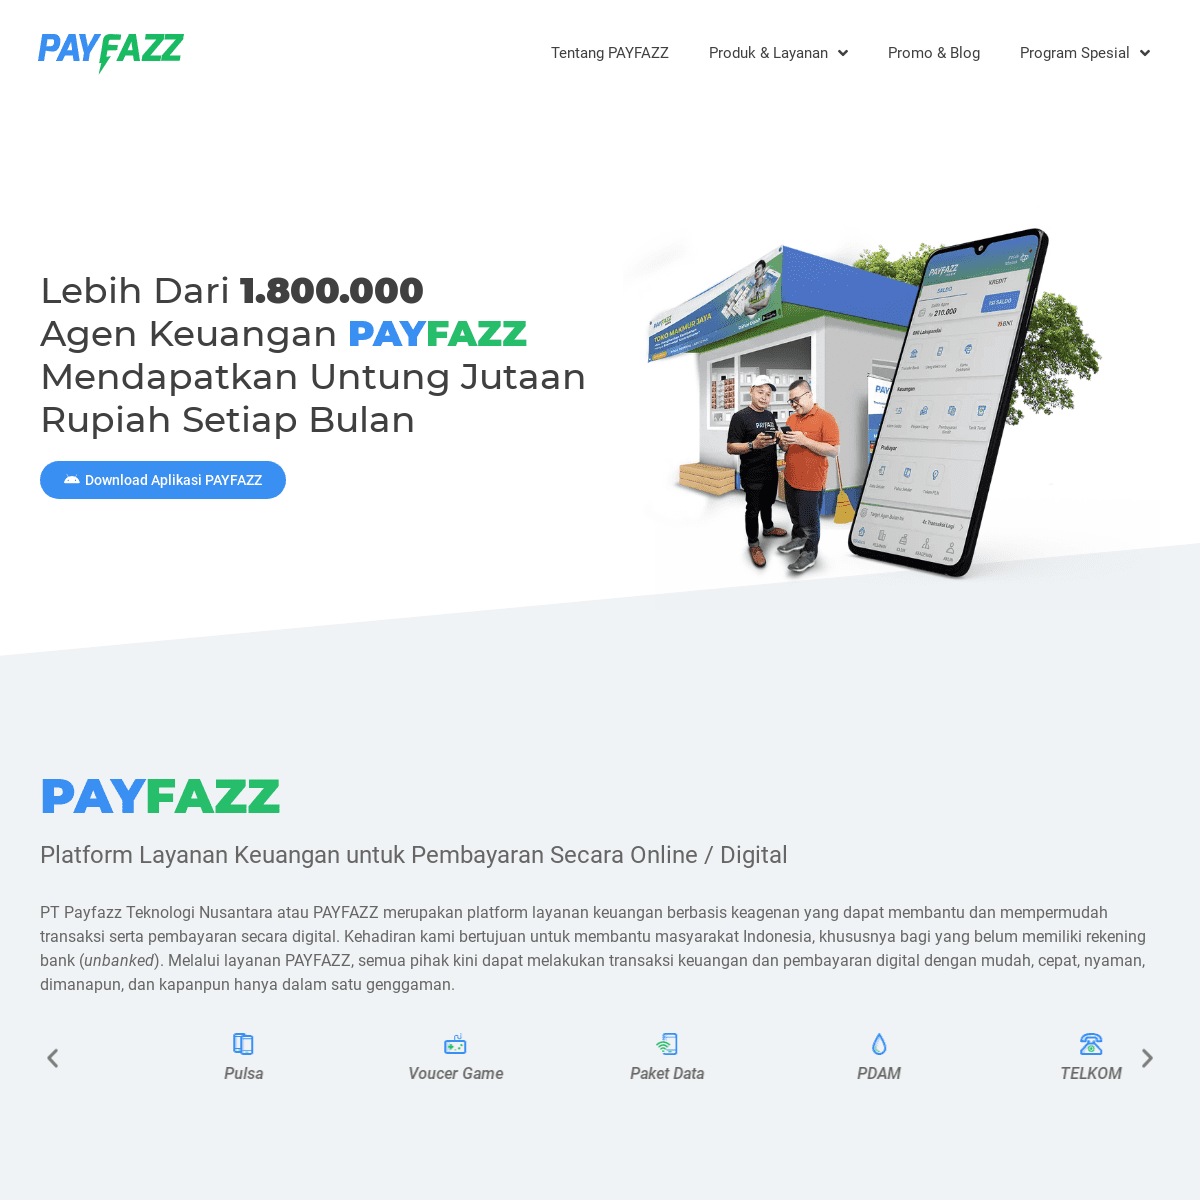 A complete backup of payfazz.com